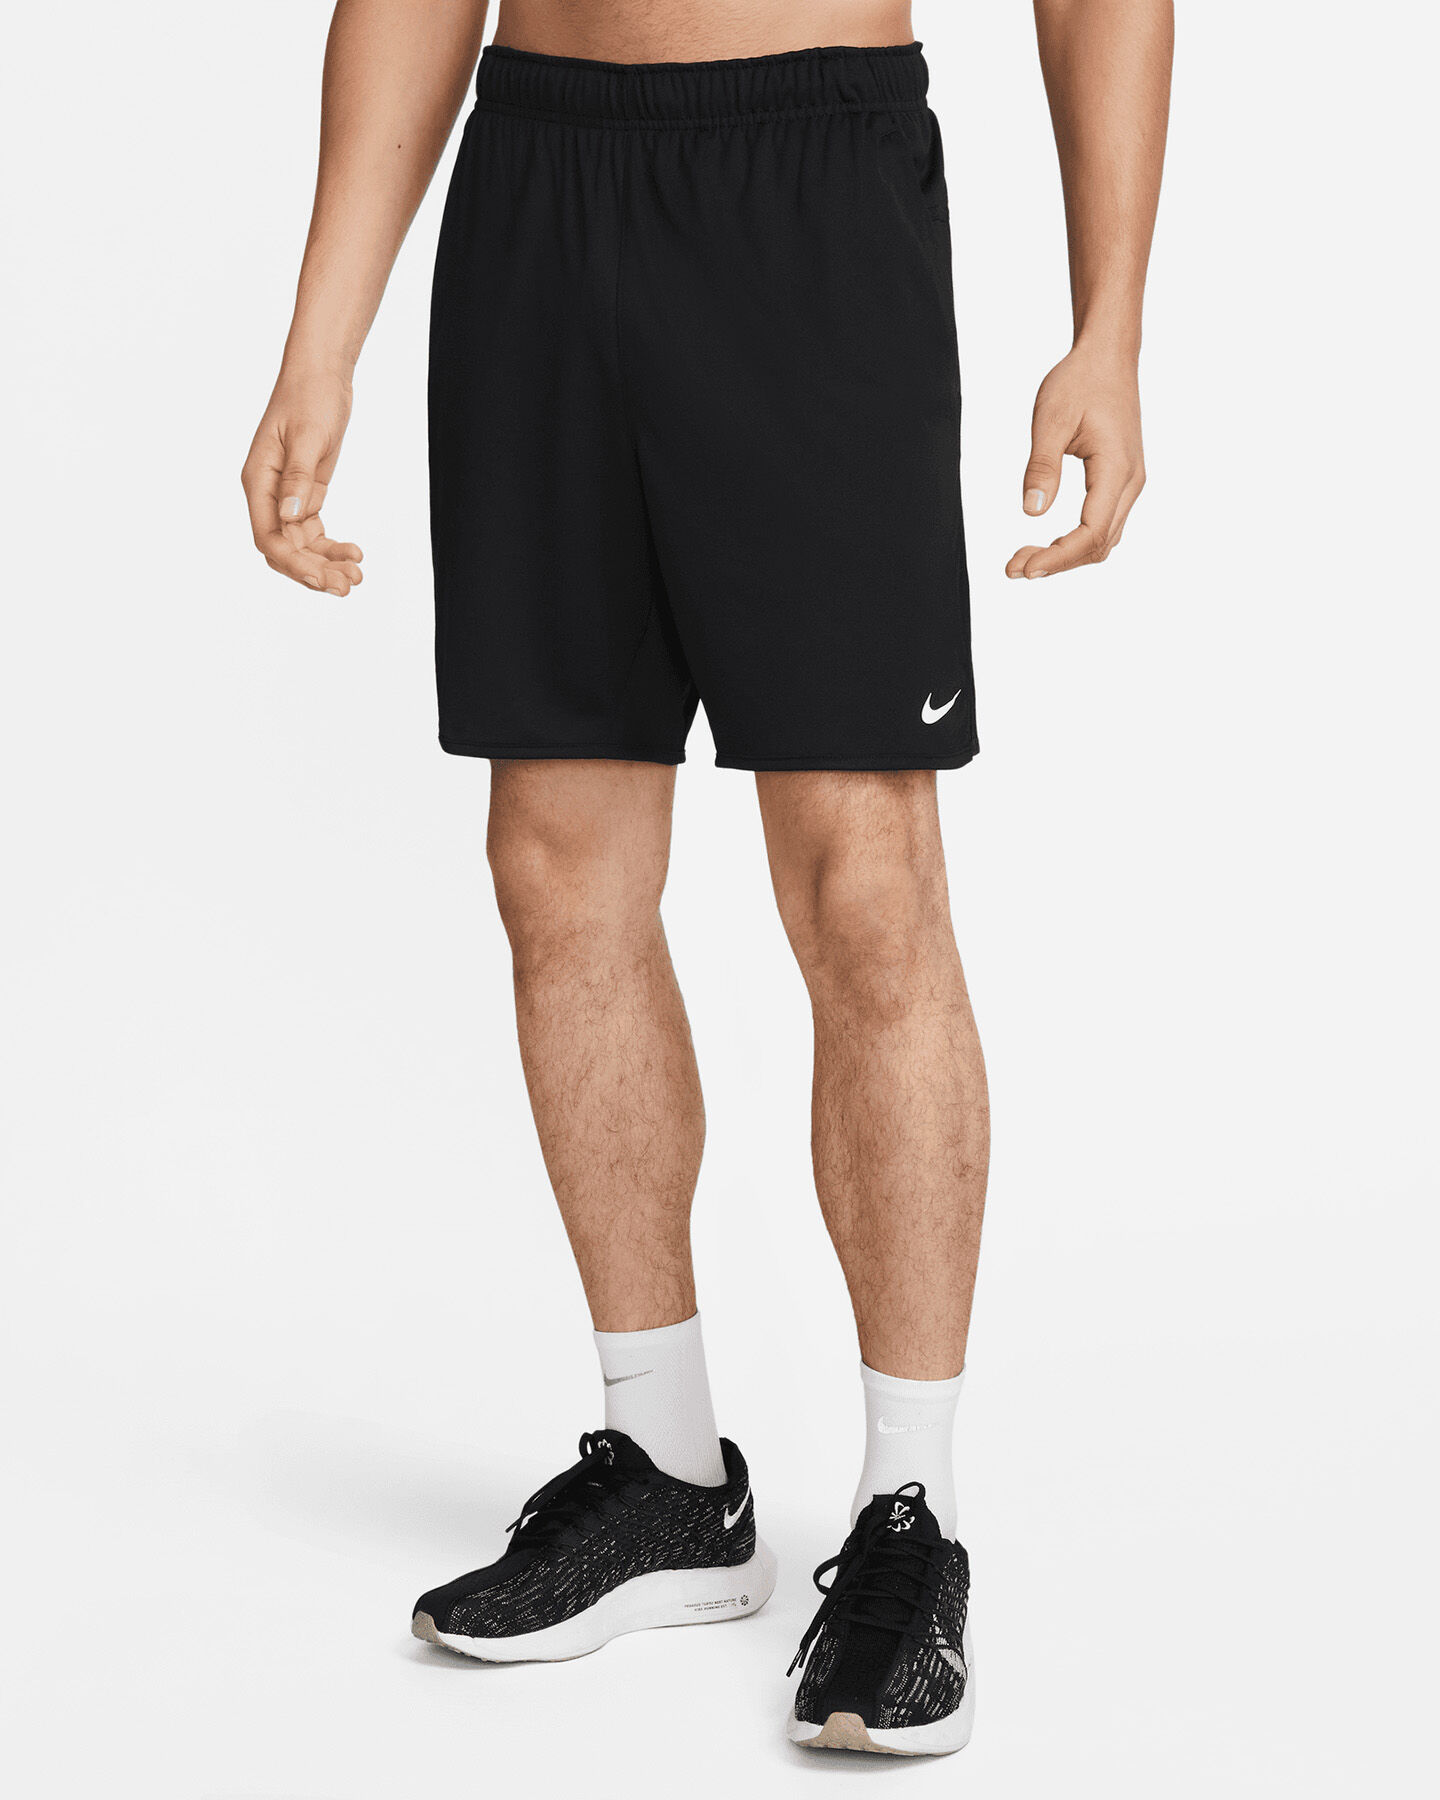  Pantalone training NIKE DRI FIT TOTALITY KNIT 7IN M S5539401|010|S scatto 0